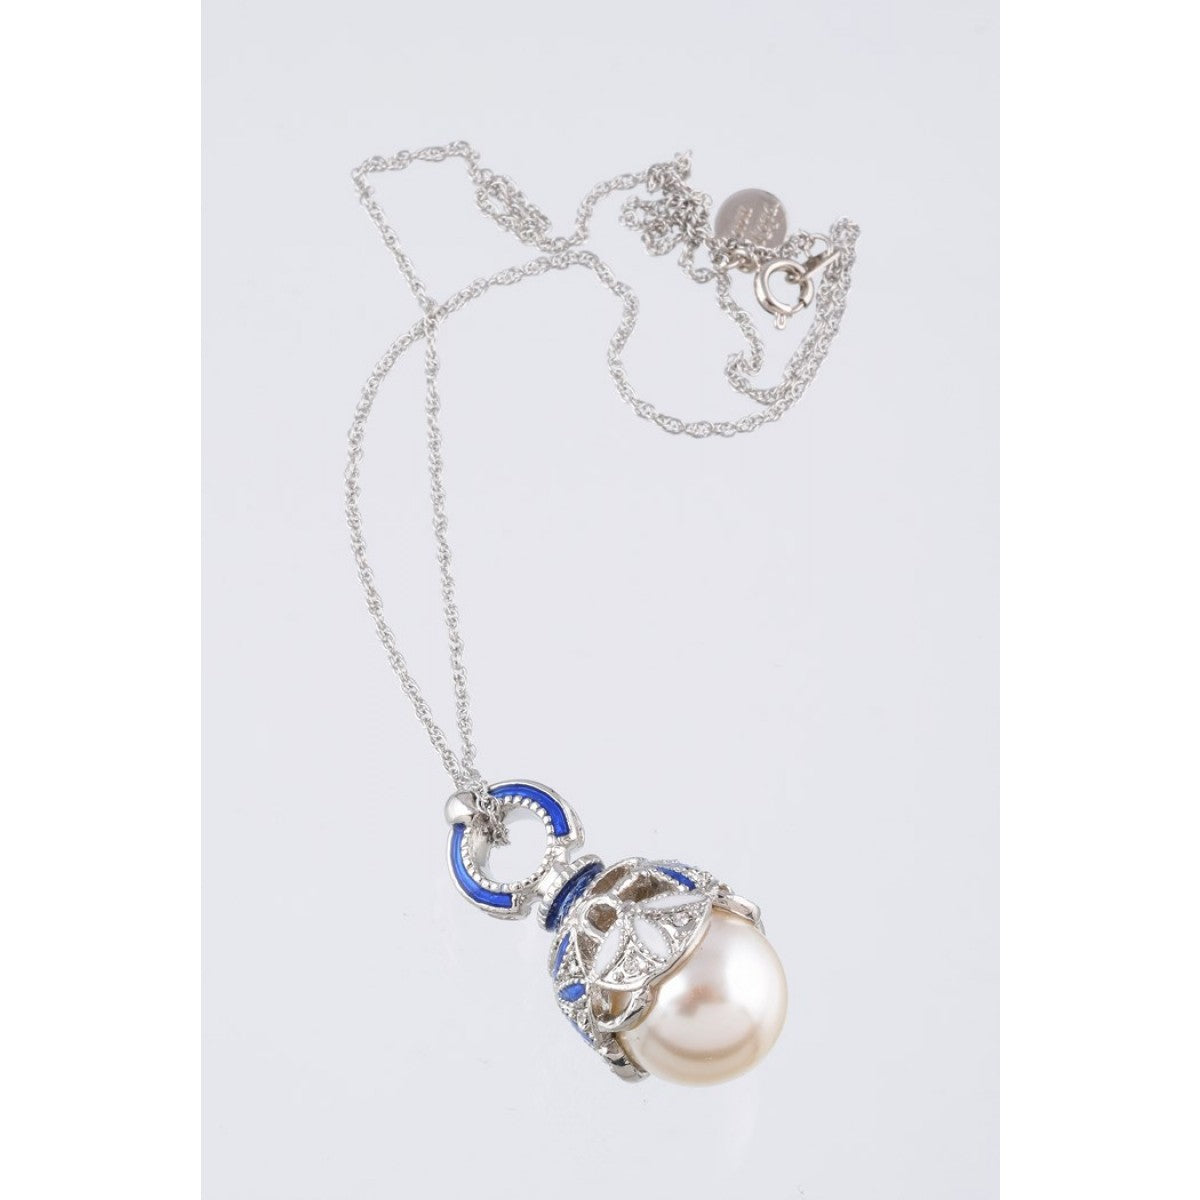 Silver & Blue Pearl Fabrege Egg Styled Pendant Necklace